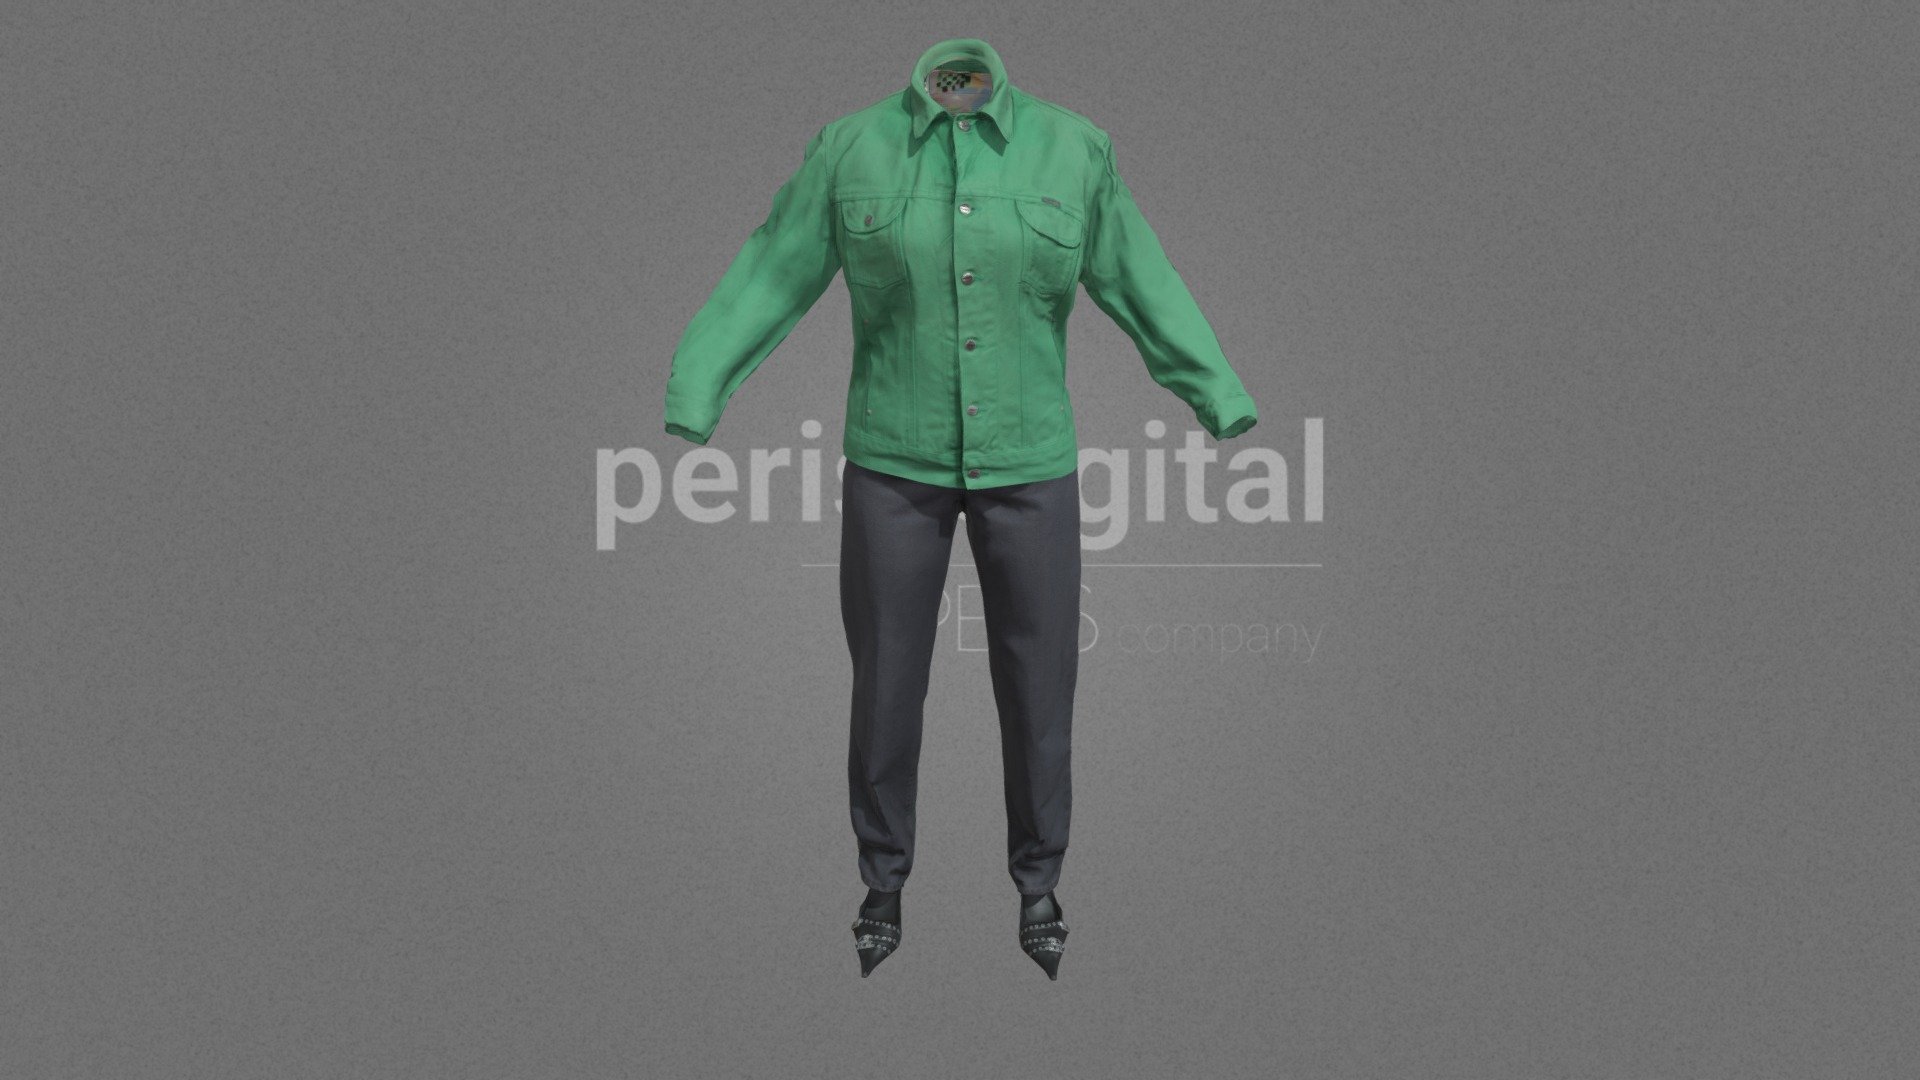 Green denim jacket, white shirt with prints, black trousers, black shoes with heels.

PERIS DIGITAL HIGH QUALITY 3D CLOTHING They are optimized for use in medium/high poly 3D scenes and optimized for rendering. We do not include characters, but they are positioned for you to include and adjust your own character. They have a LOW Poly Mesh (LODRIG) inside the Blender file (included in the AdditionalFiles), which you can use for vertex weighting or cloth simulation and thus, make the transfer of vertices or property masks from the LOW to the HIGH model. We have included in Additional Files, the texture maps in high resolution, as well as the Displacement maps in high resolution too, so you can perform extreme point of view with your 3D cameras. With the Blender file (included in AdditionalFiles) you will be able to edit any aspect of the set . Enjoy it!

Web: https://peris.digital/ - 80s Fashion Series - Woman 17 - Buy Royalty Free 3D model by Peris Digital (@perisdigital) 3d model